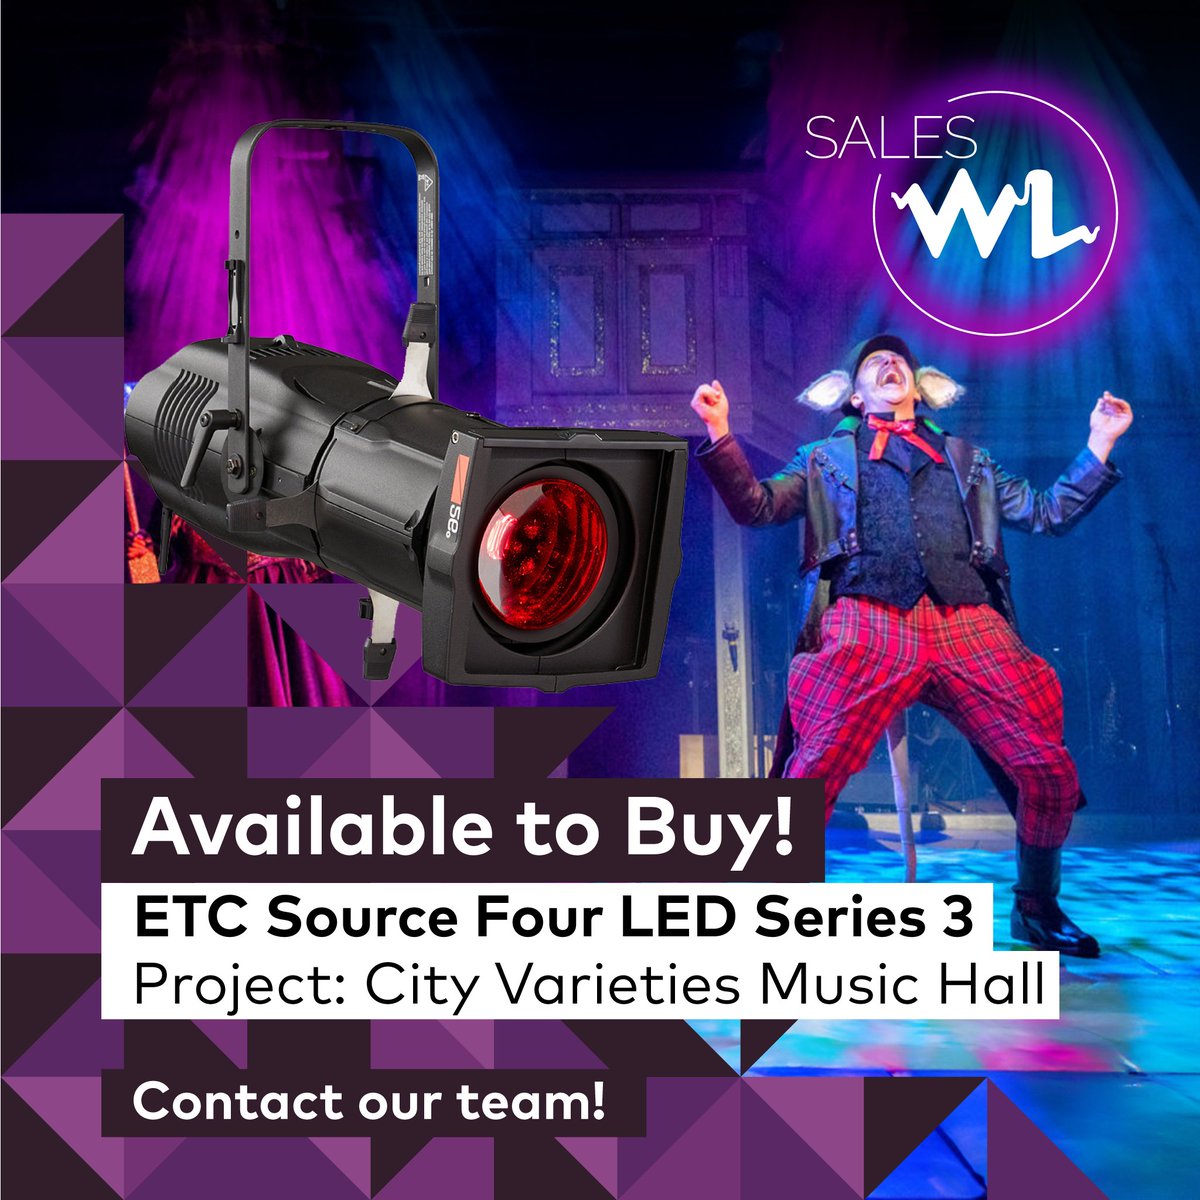 Available to Buy – @ETCInc Source Four LED Series 3 The Source Four LED Series 3 brings the brightest light to the stage with the Lustr X8 array for the most nuanced colours and the Daylight HDR array for tuneable white light. Visit: hubs.la/Q02pjzHY0